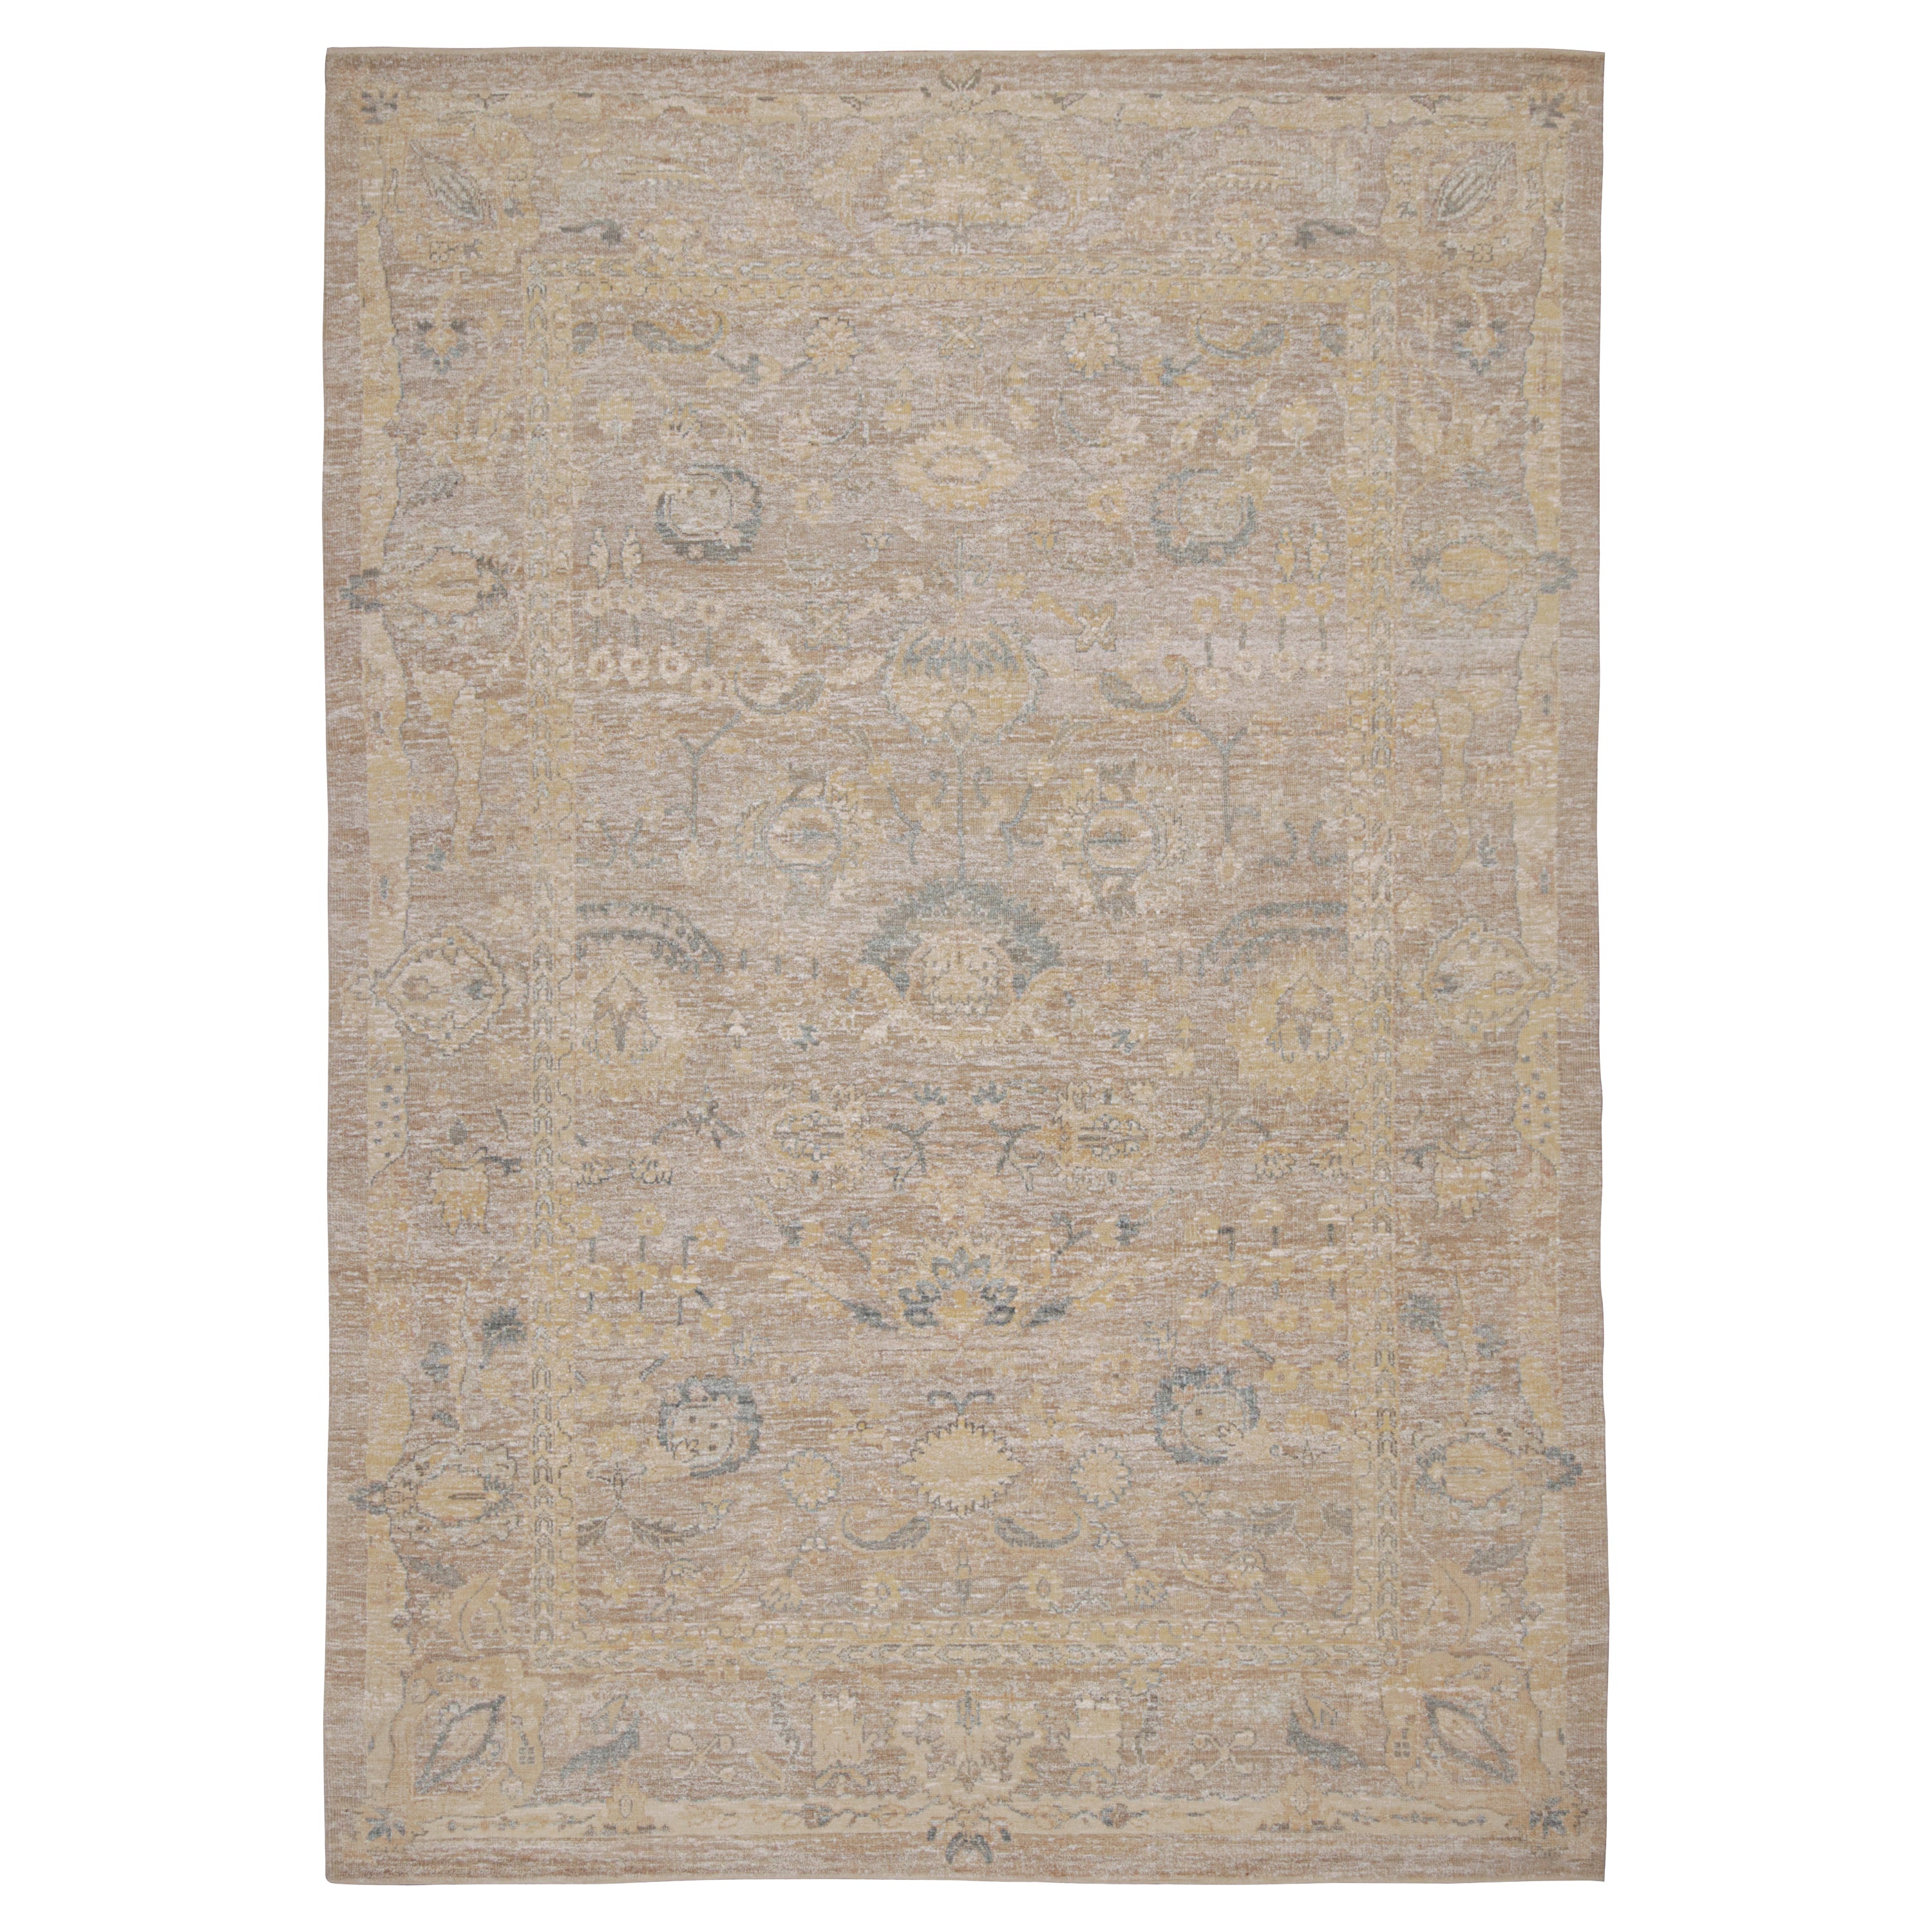 Rug & Kilim’s Oushak Style Rug with Beige-Brown, Blue and Gold Floral Patterns For Sale